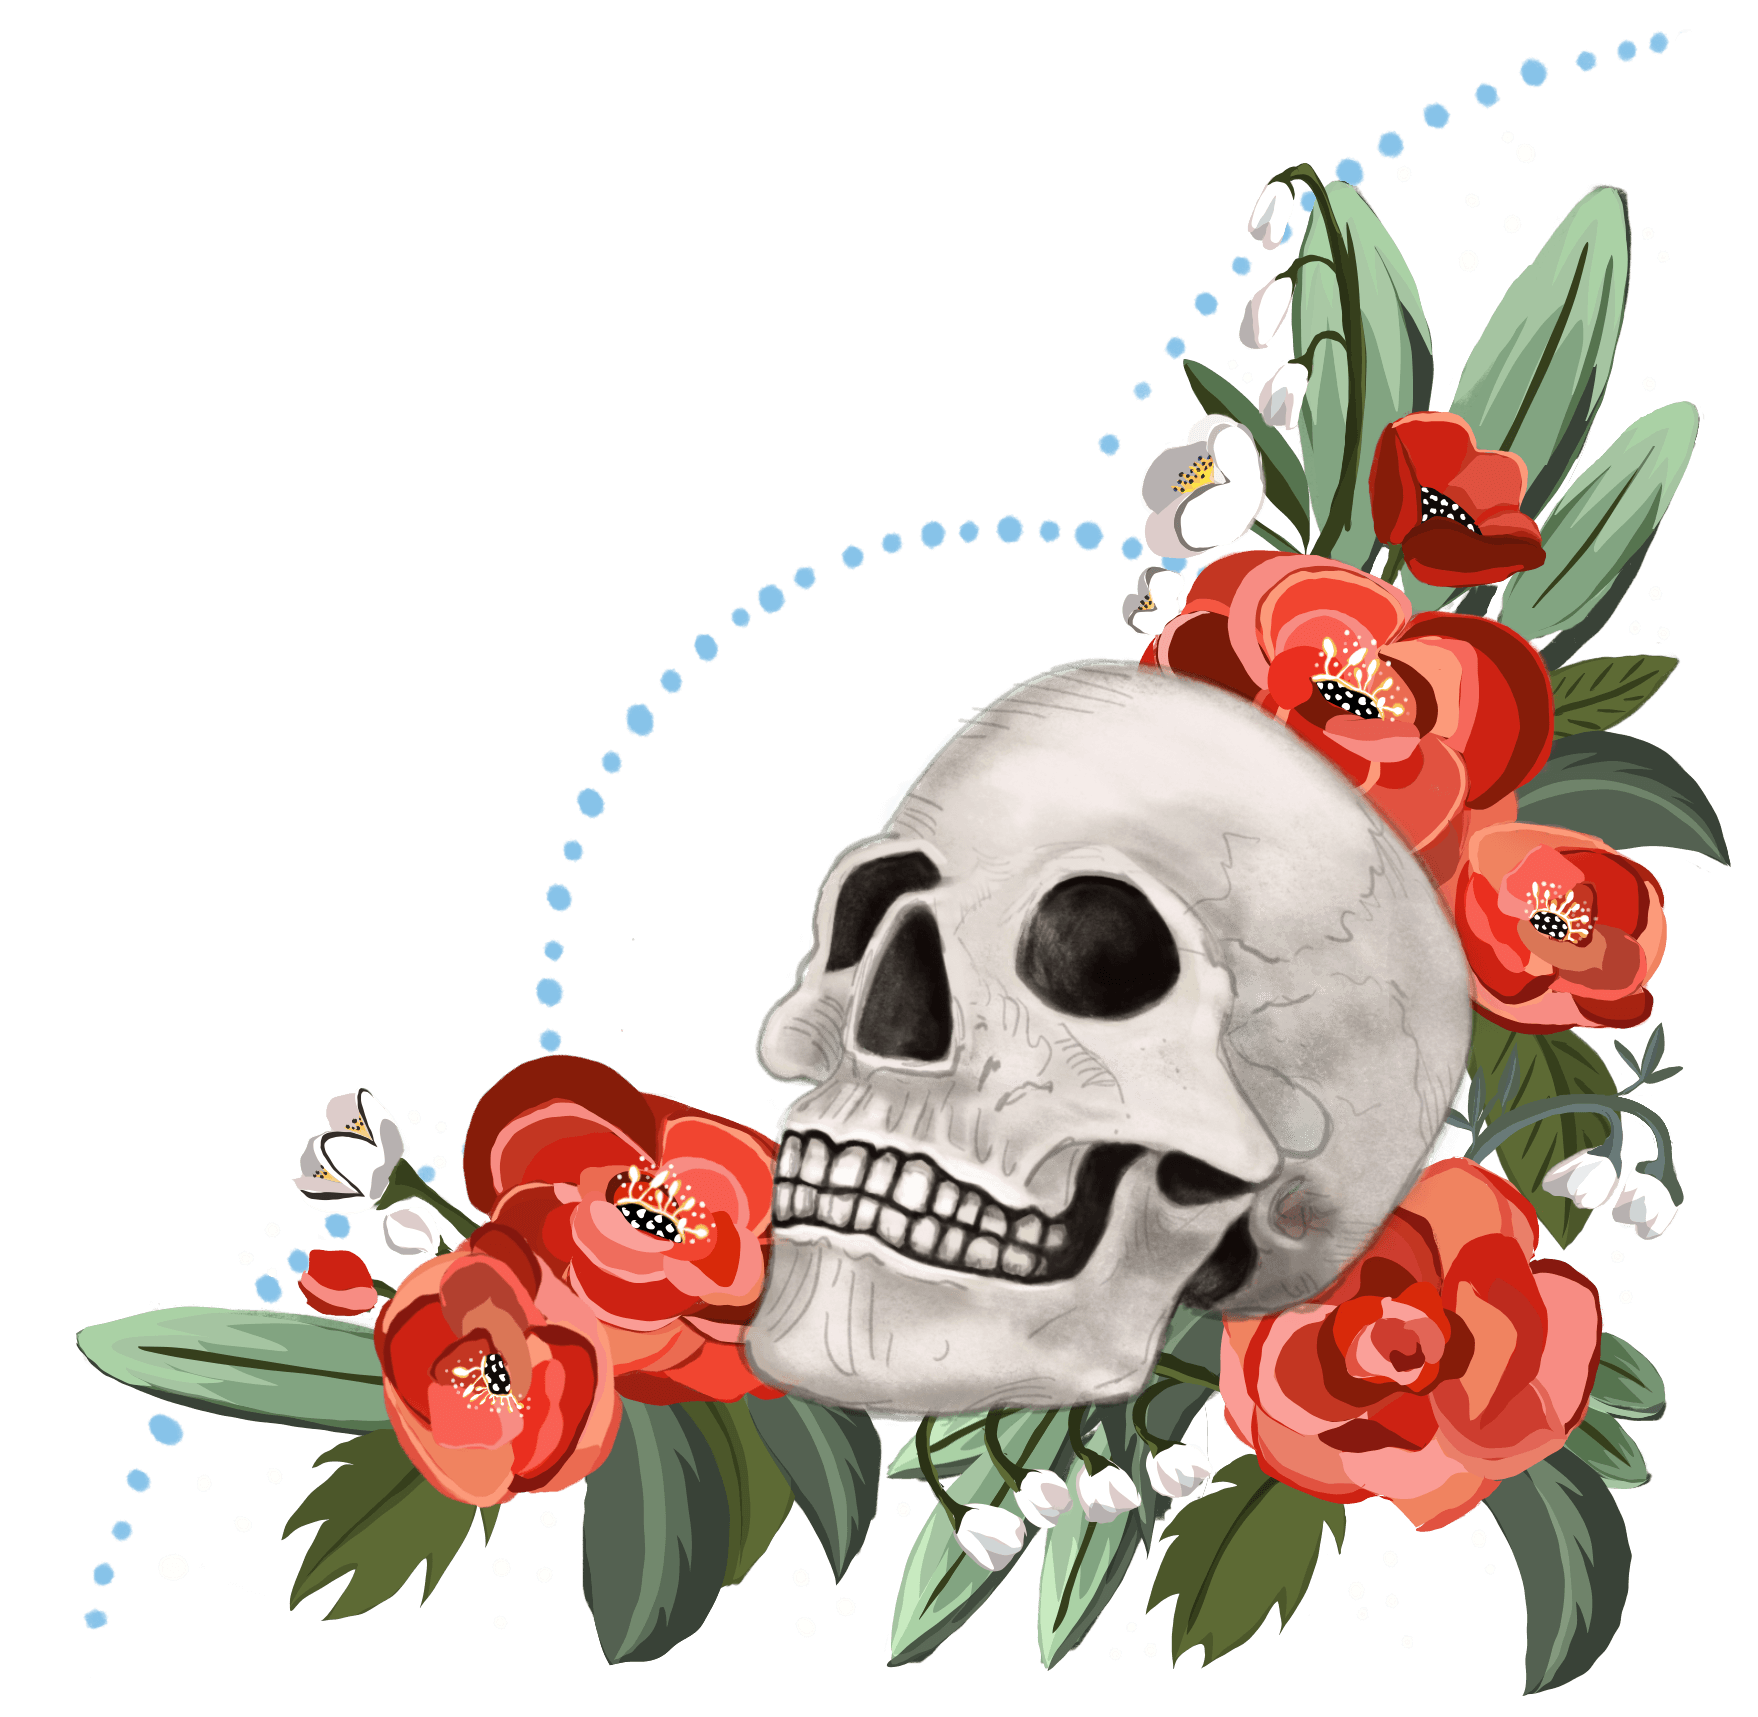 A skull is surrounded by red roses and leaves on a white background.